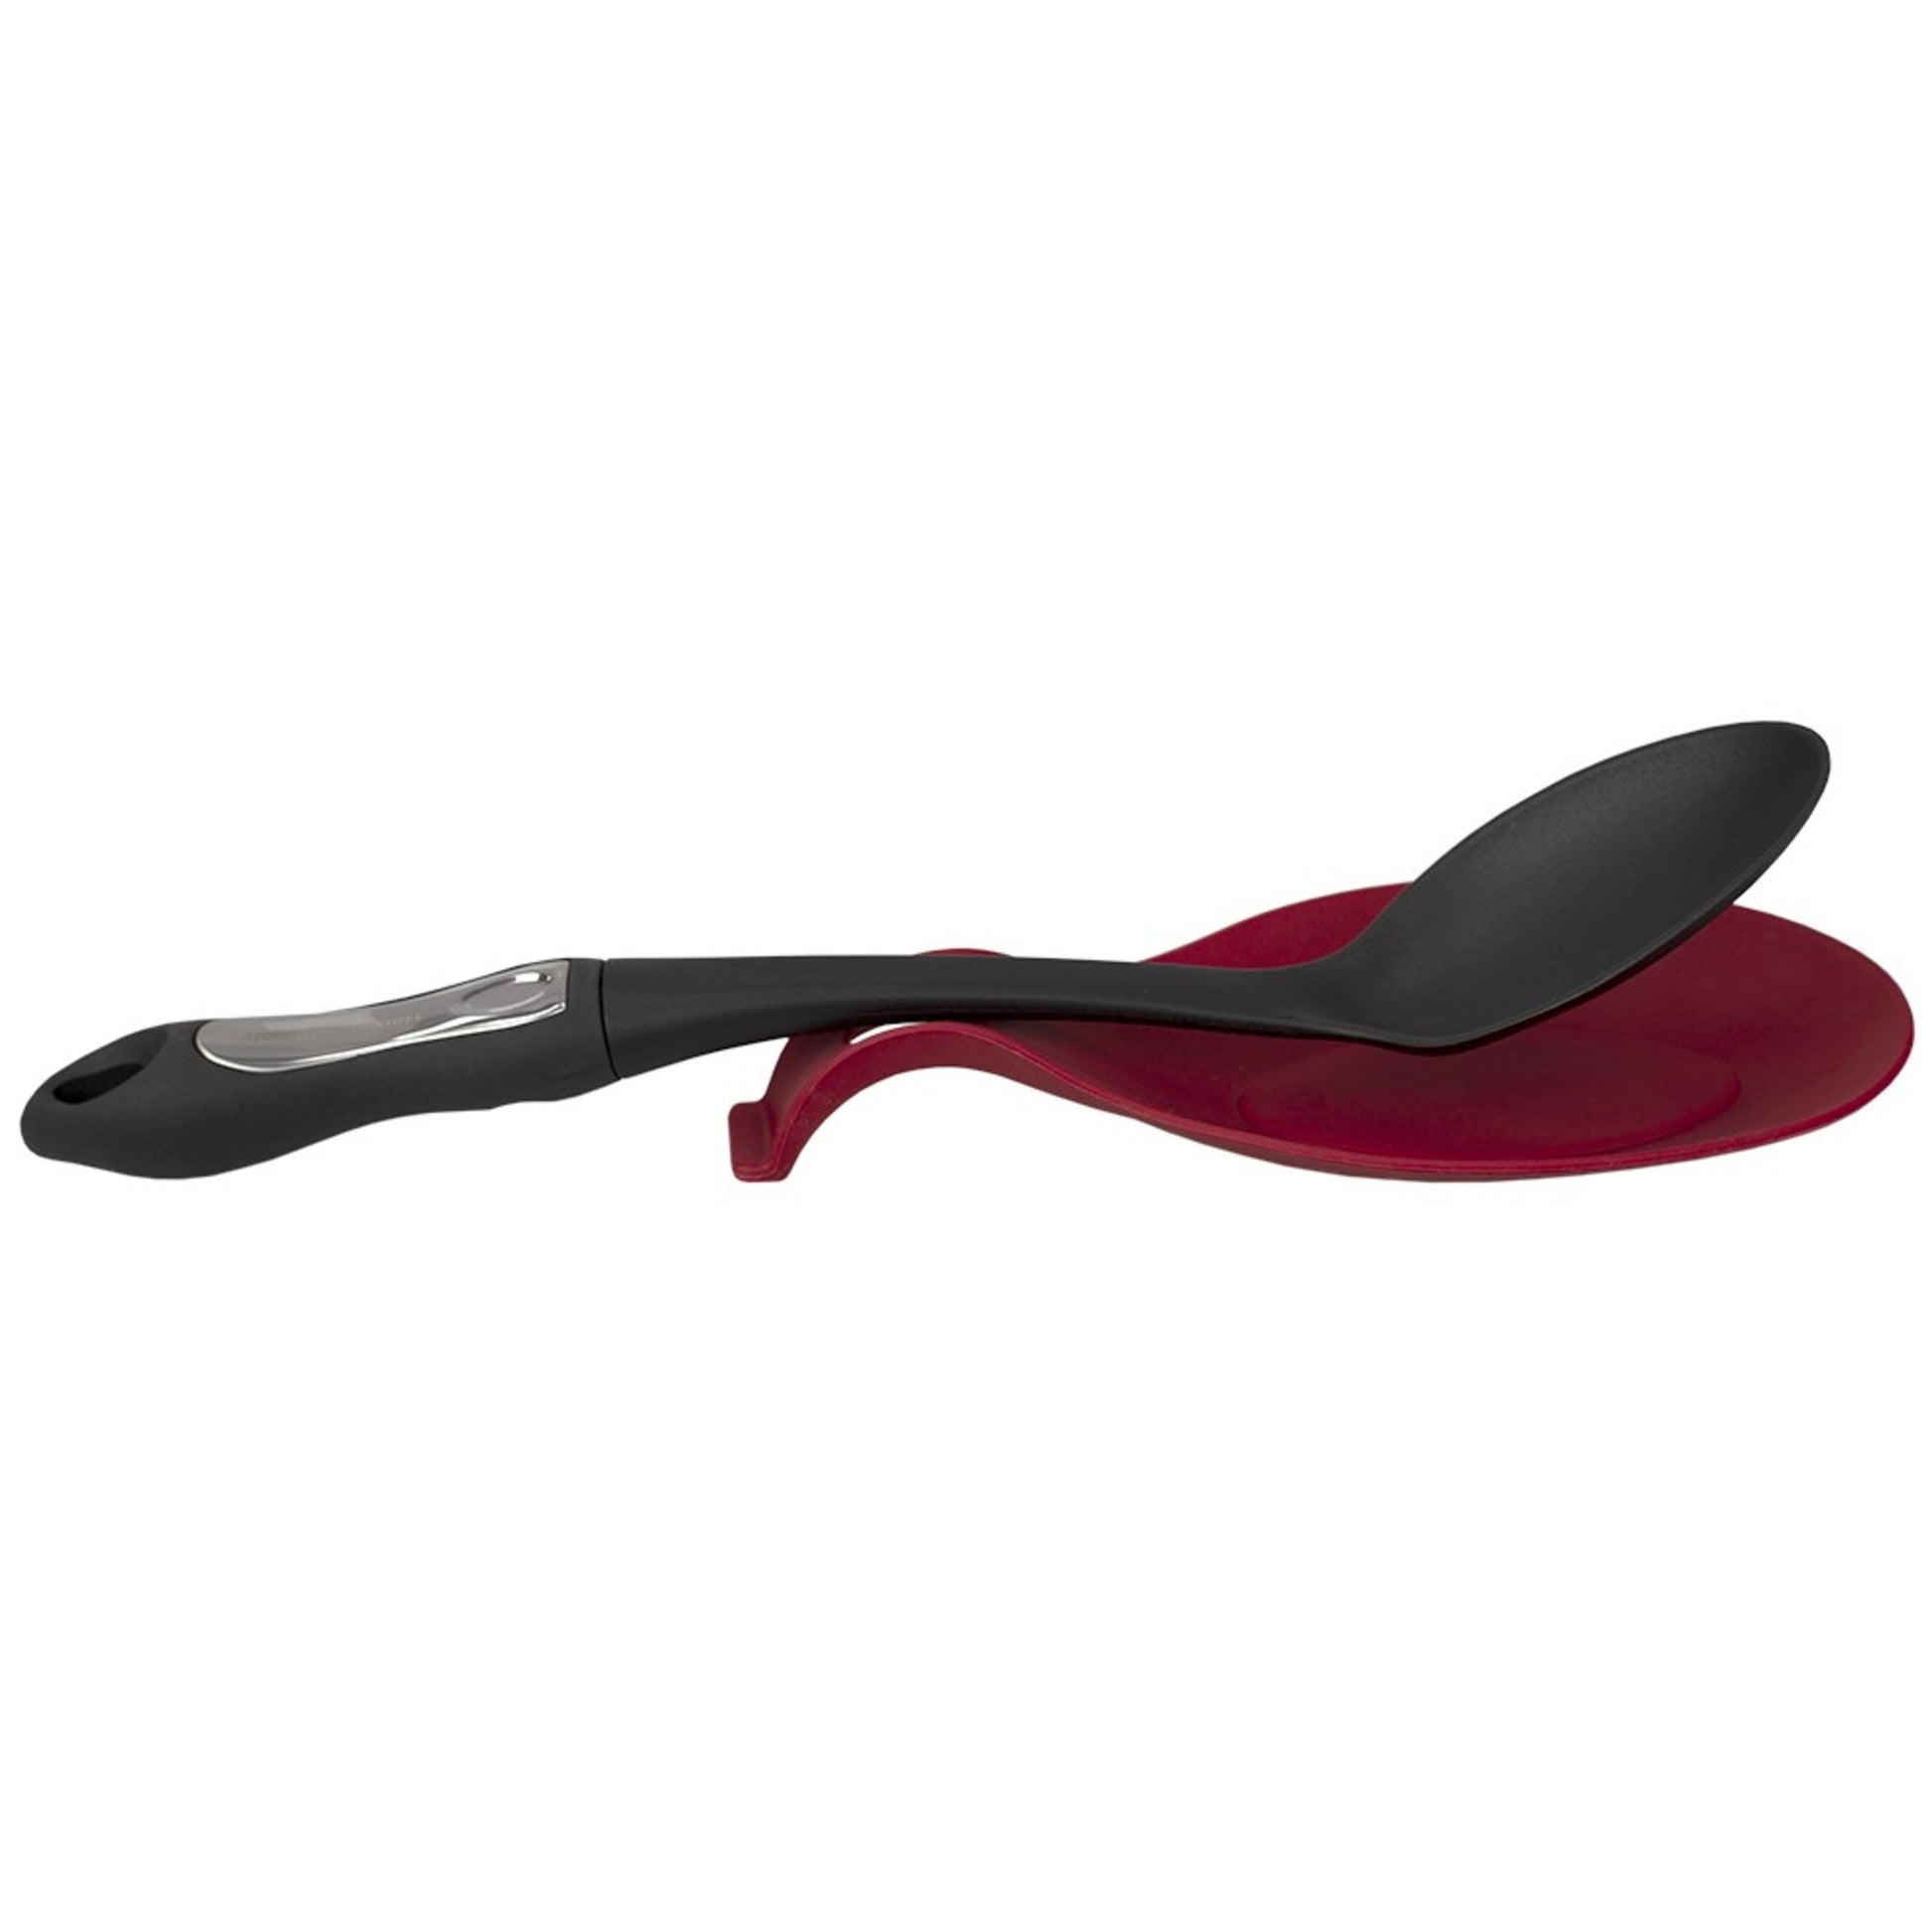 Home Basics Food Grade Flexible Silicone Oversized Almond Shaped Spoon Rest, Red - Red